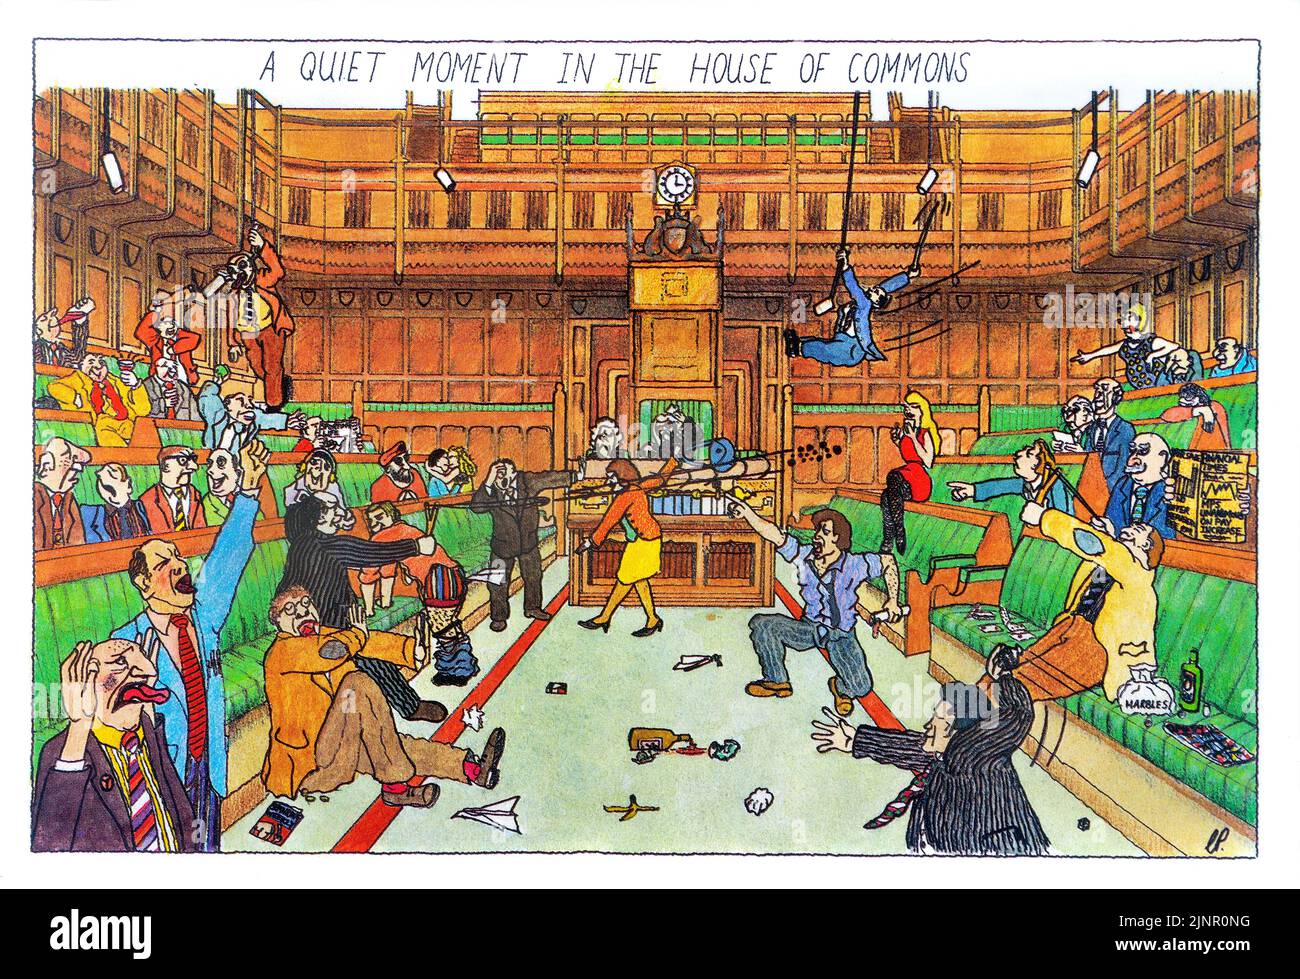 Prime Minister's Question Time in the House of Commons. Parliament, 1980's amusing funny London postcard illustrated by Chris Parker Stock Photo